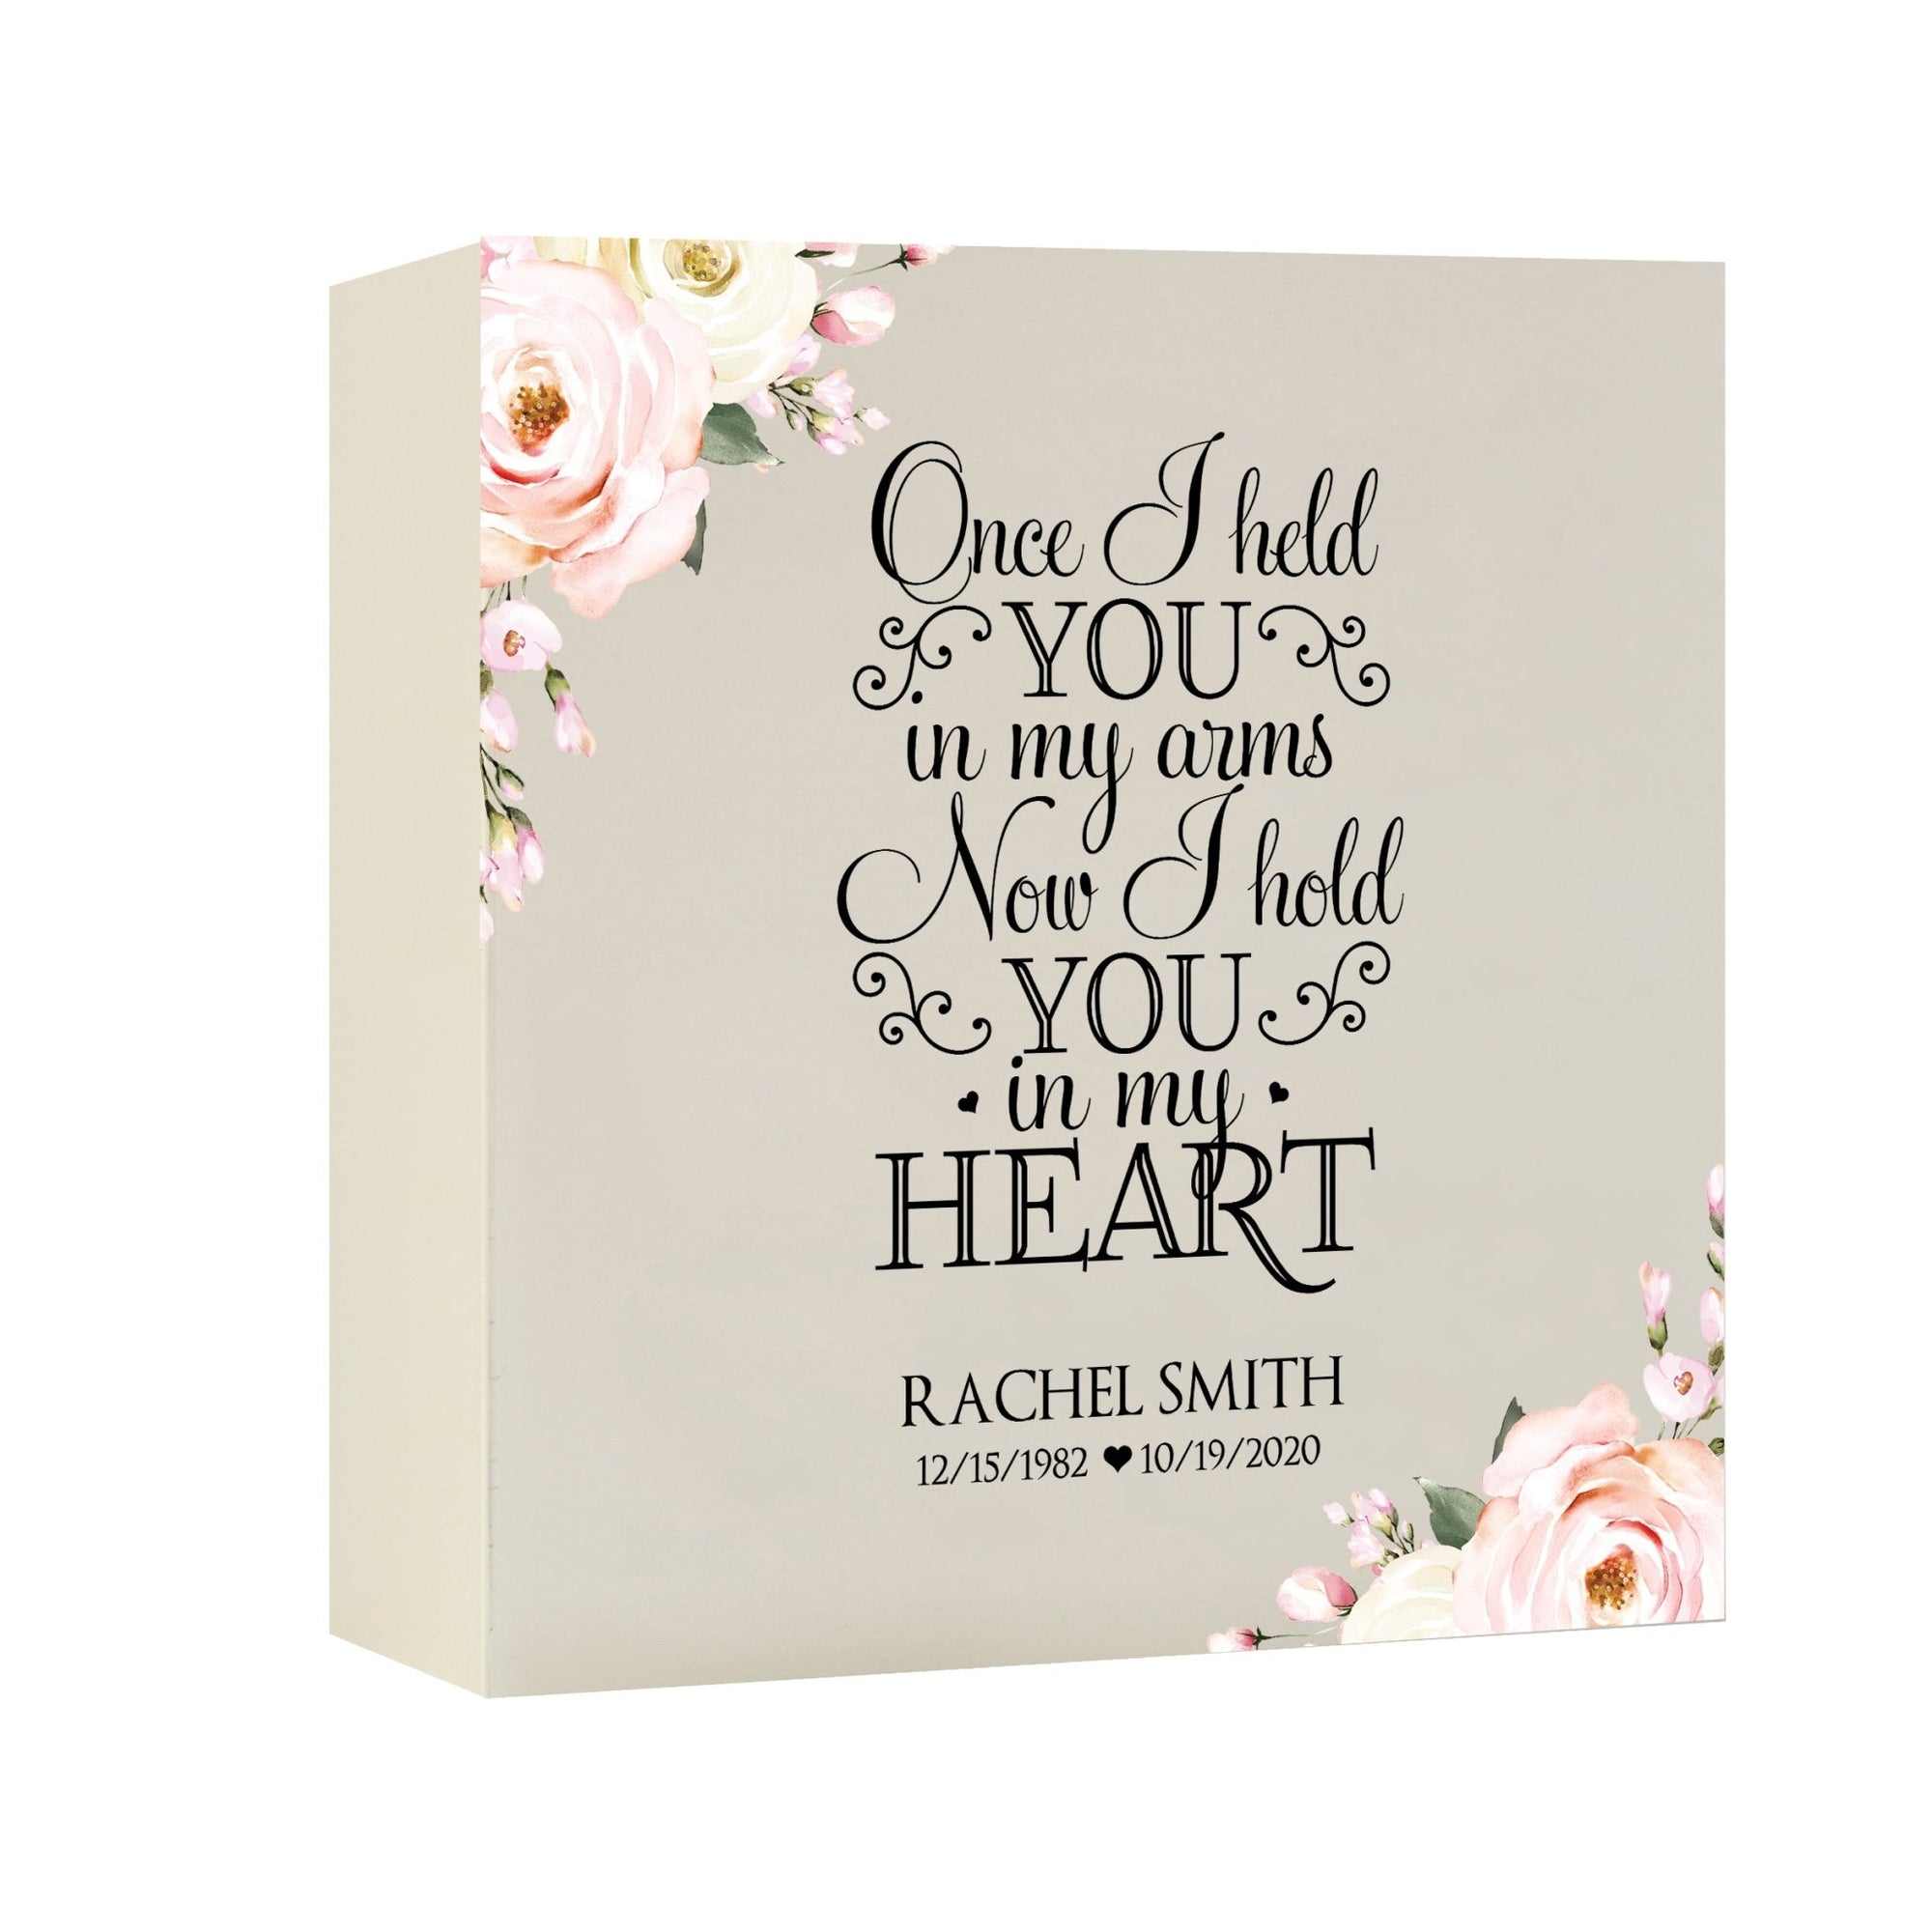 Timeless Human Memorial Shadow Box Urn With Inspirational Verse in Ivory - Once I Held You - LifeSong Milestones